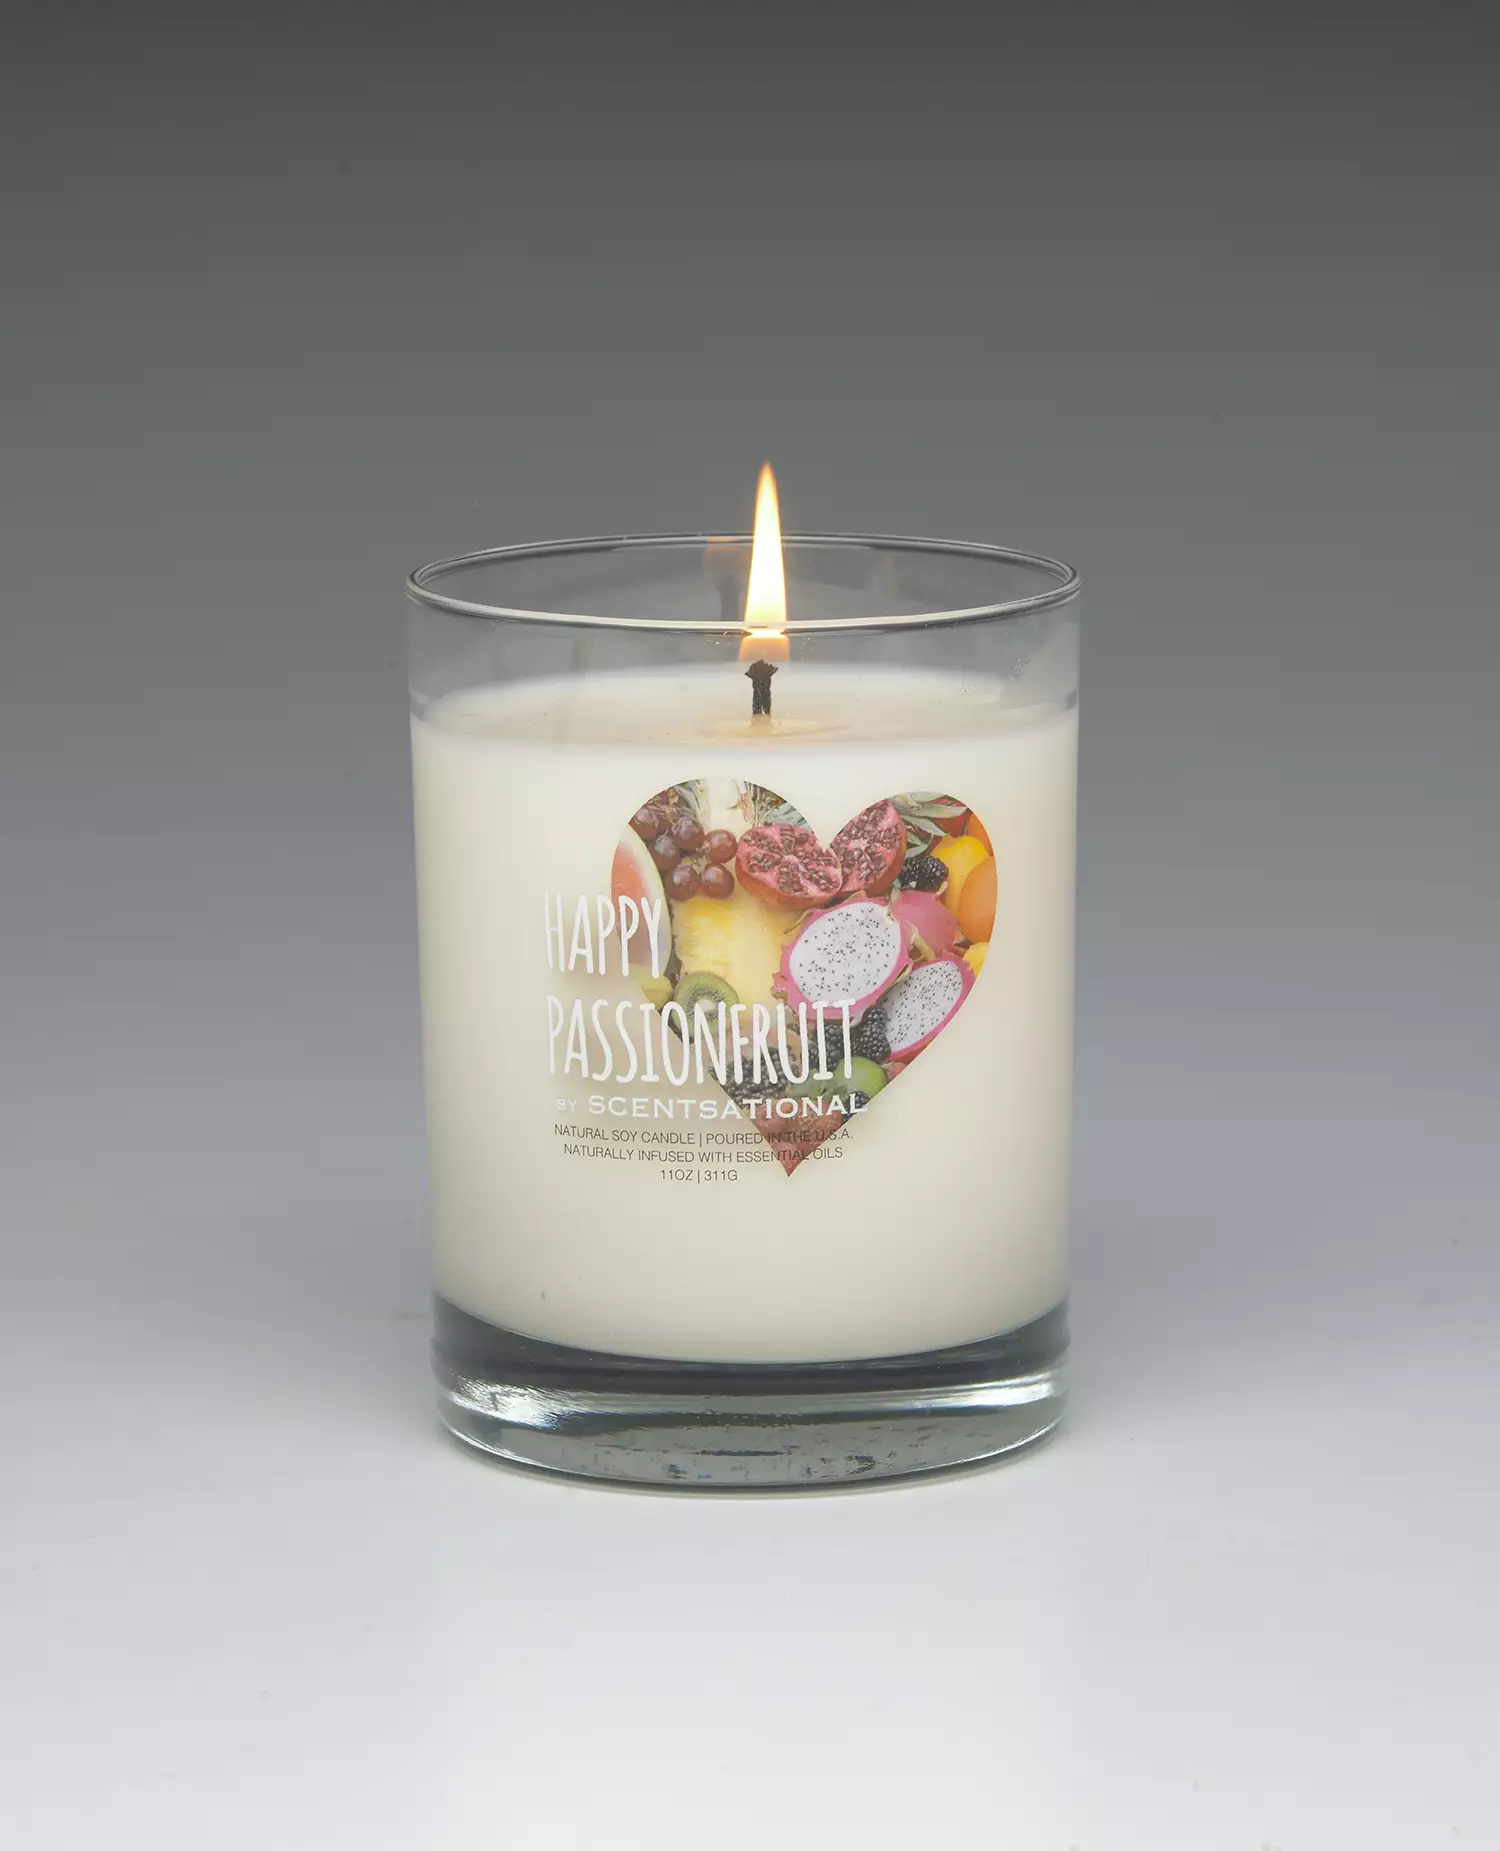 Happy Passionfruit – 11oz scented candle burning